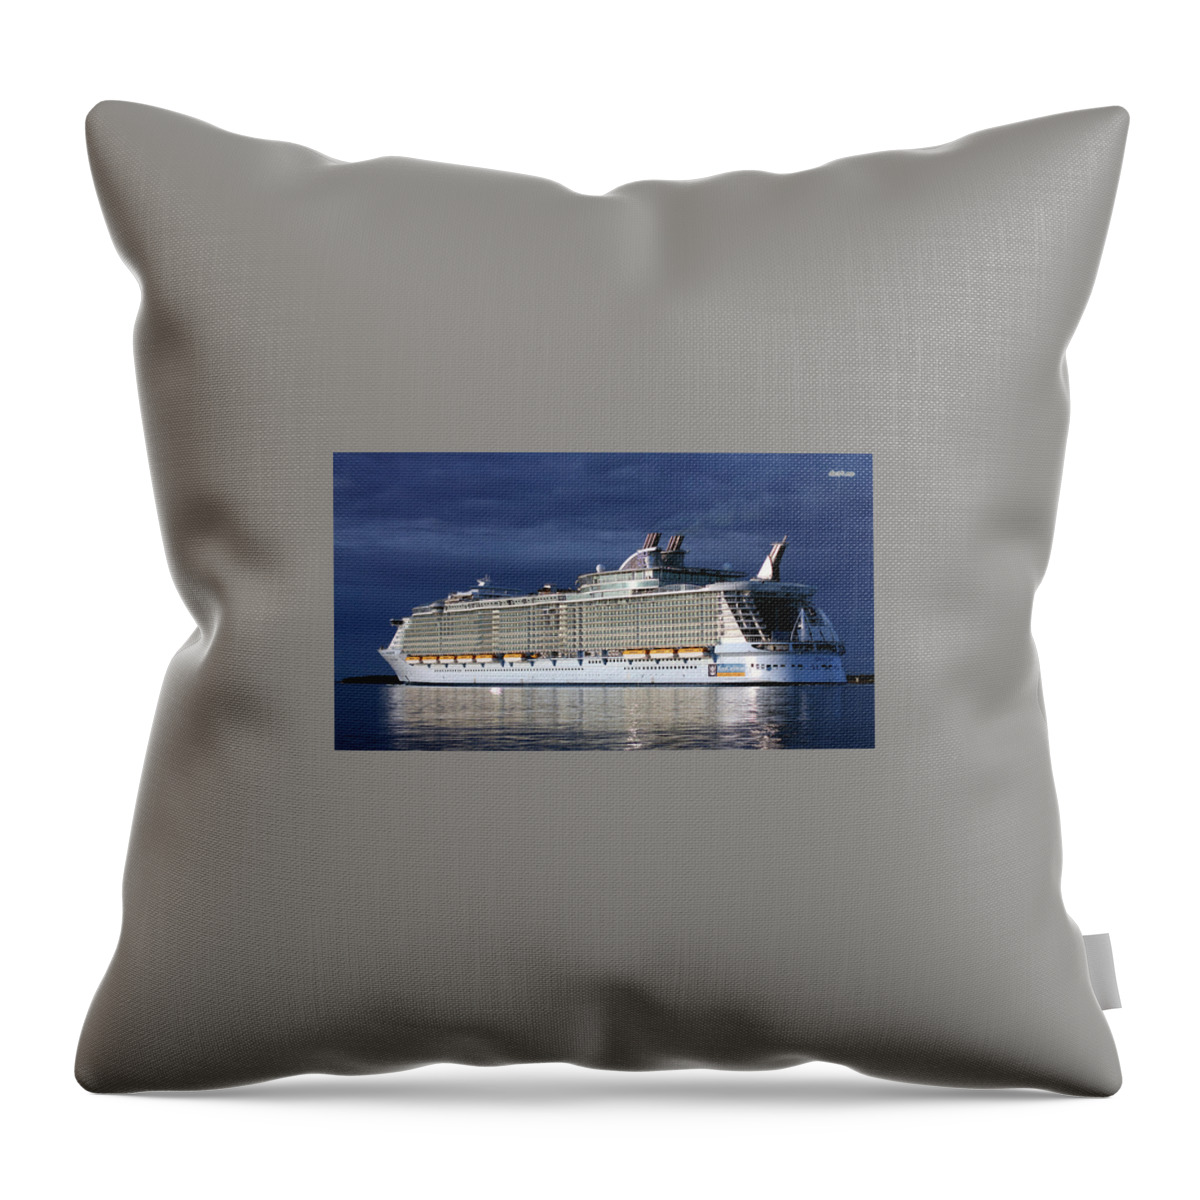 Oasis Of The Seas Throw Pillow featuring the photograph Oasis Of The Seas by Jackie Russo